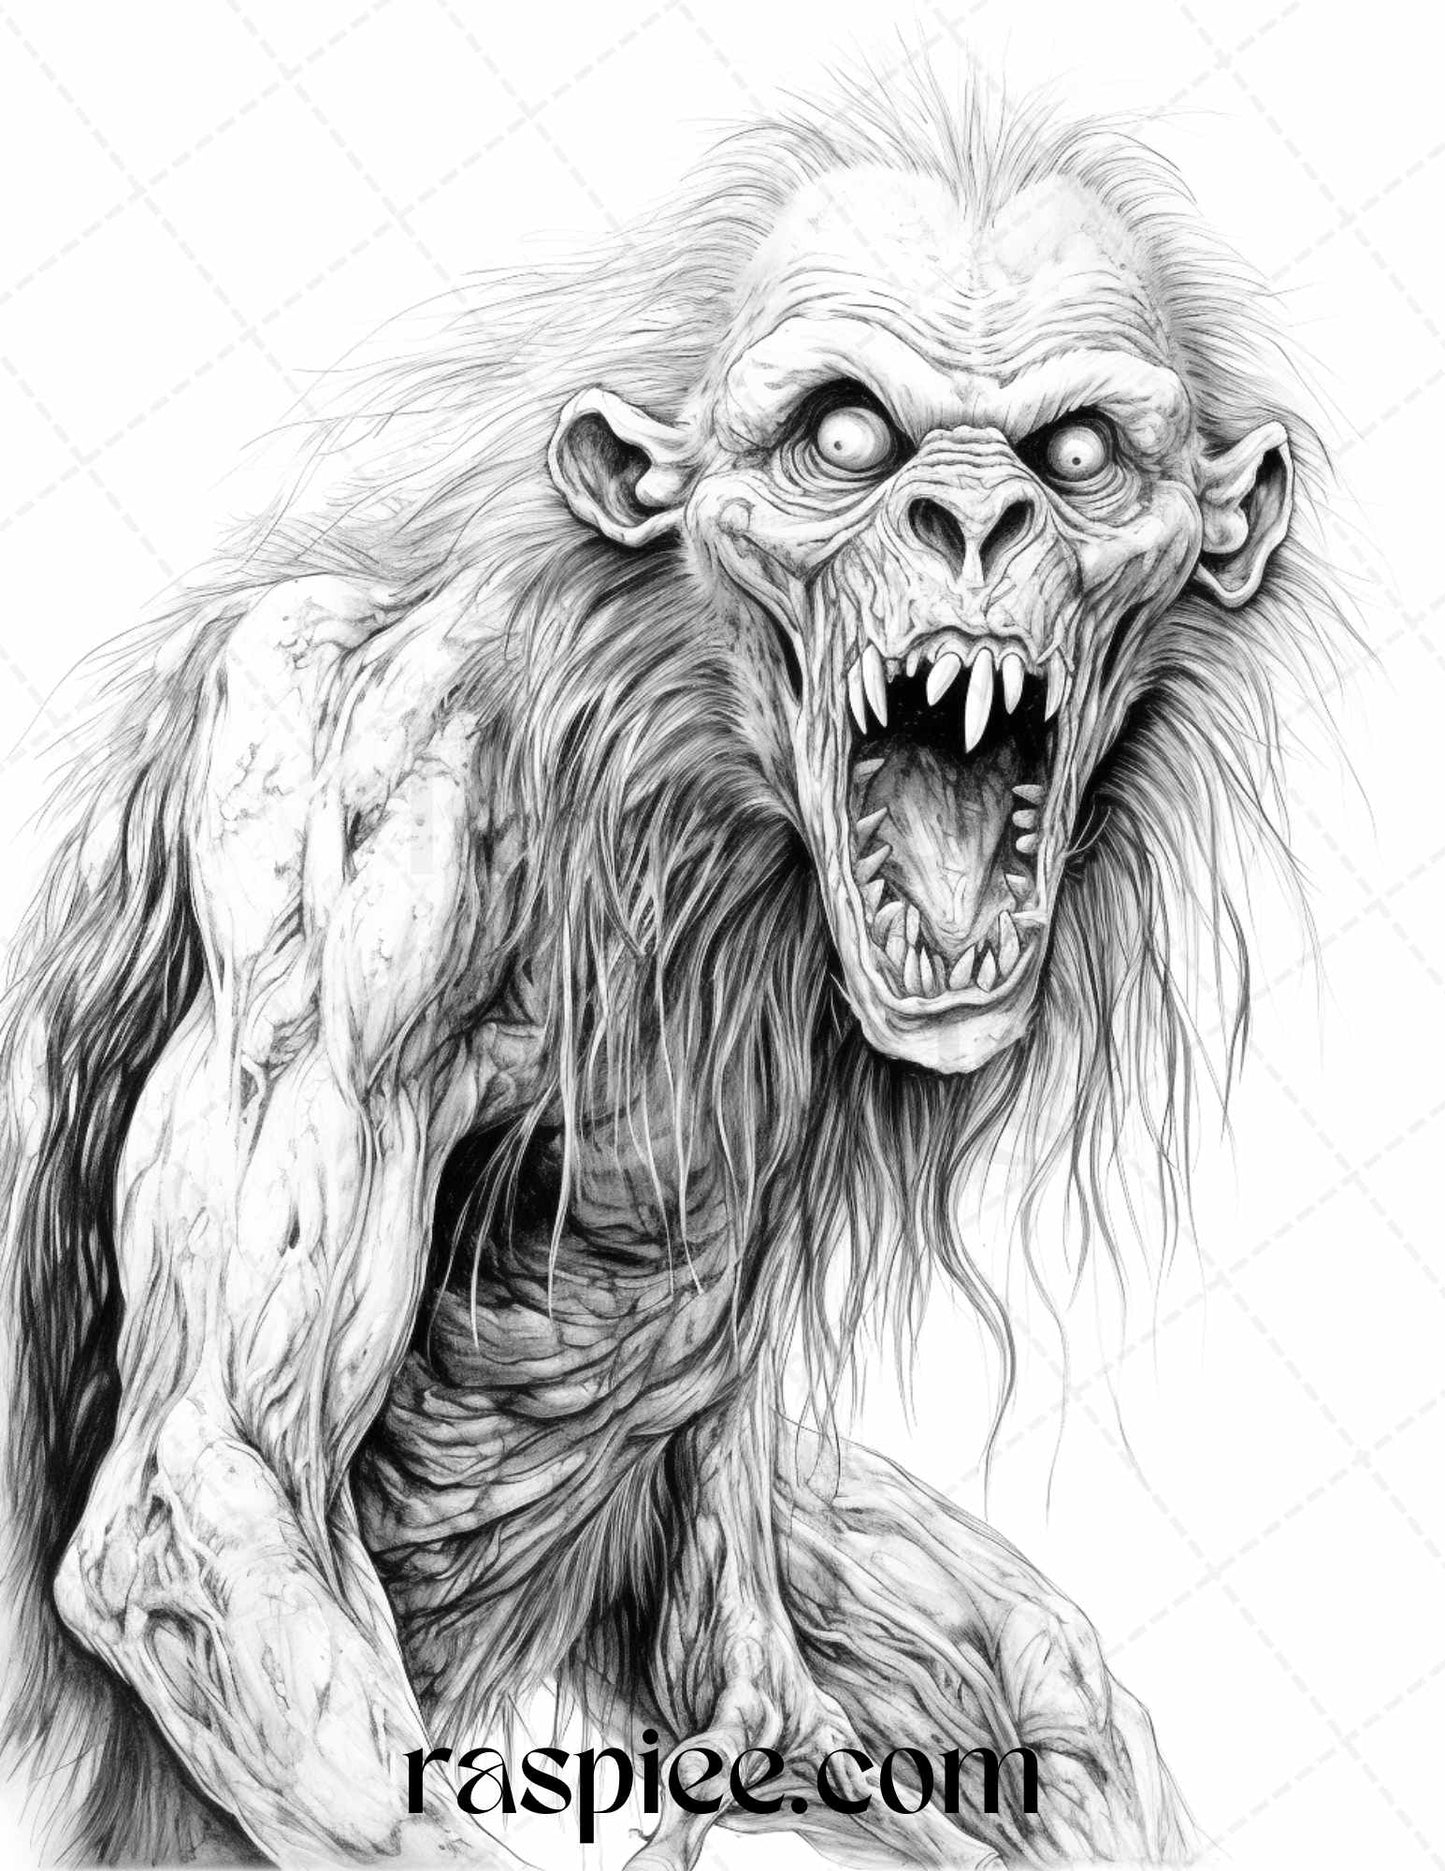 Spooky Zombie Animals Grayscale Coloring Page, Halloween Horror Coloring Book Printable, Zombie Animals Adult Coloring Pages, Scary Creatures Grayscale Art, Creepy Monsters Halloween Coloring, Instant Download Halloween Art